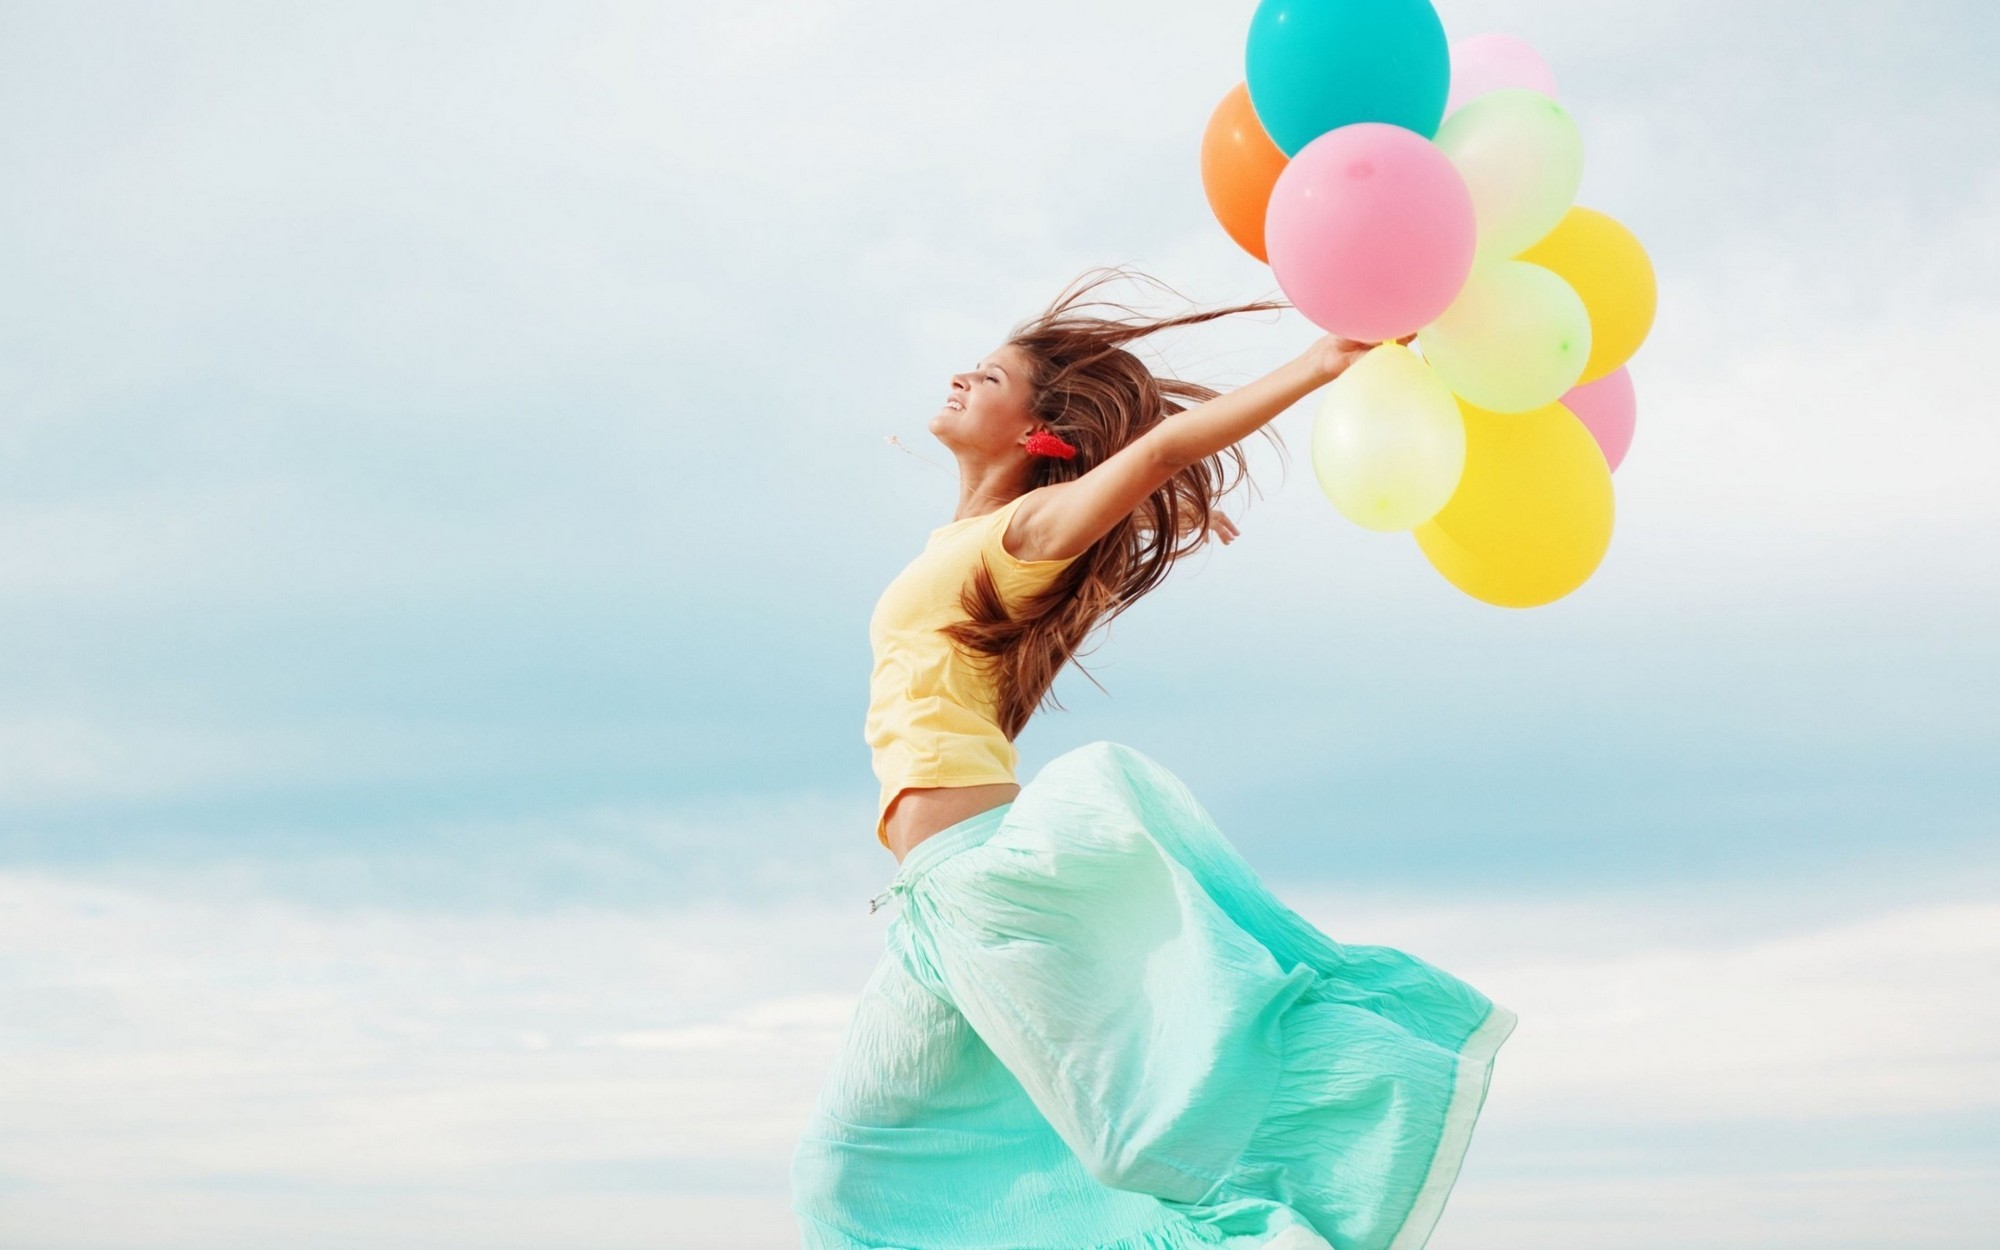 mood-girl-is-running-holding-colorful-balloons